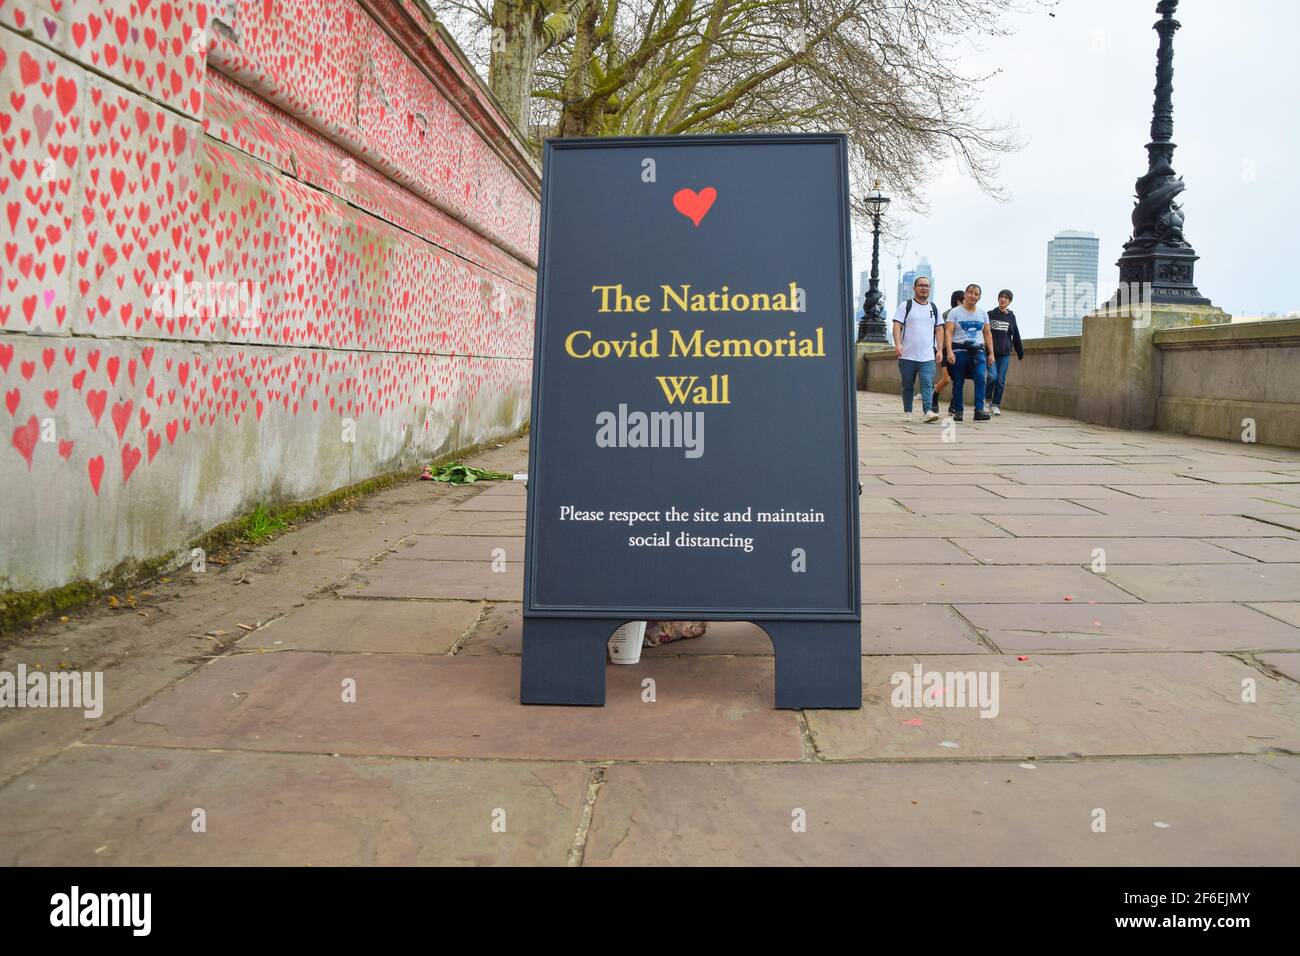 London, United Kingdom. 31st March 2021. The National Covid Memorial Wall sign. Nearly 150,000 hearts will be painted by volunteers, one for each Covid-19 victim in the UK to date, on the wall outside St Thomas' Hospital opposite Houses Of Parliament. Stock Photo